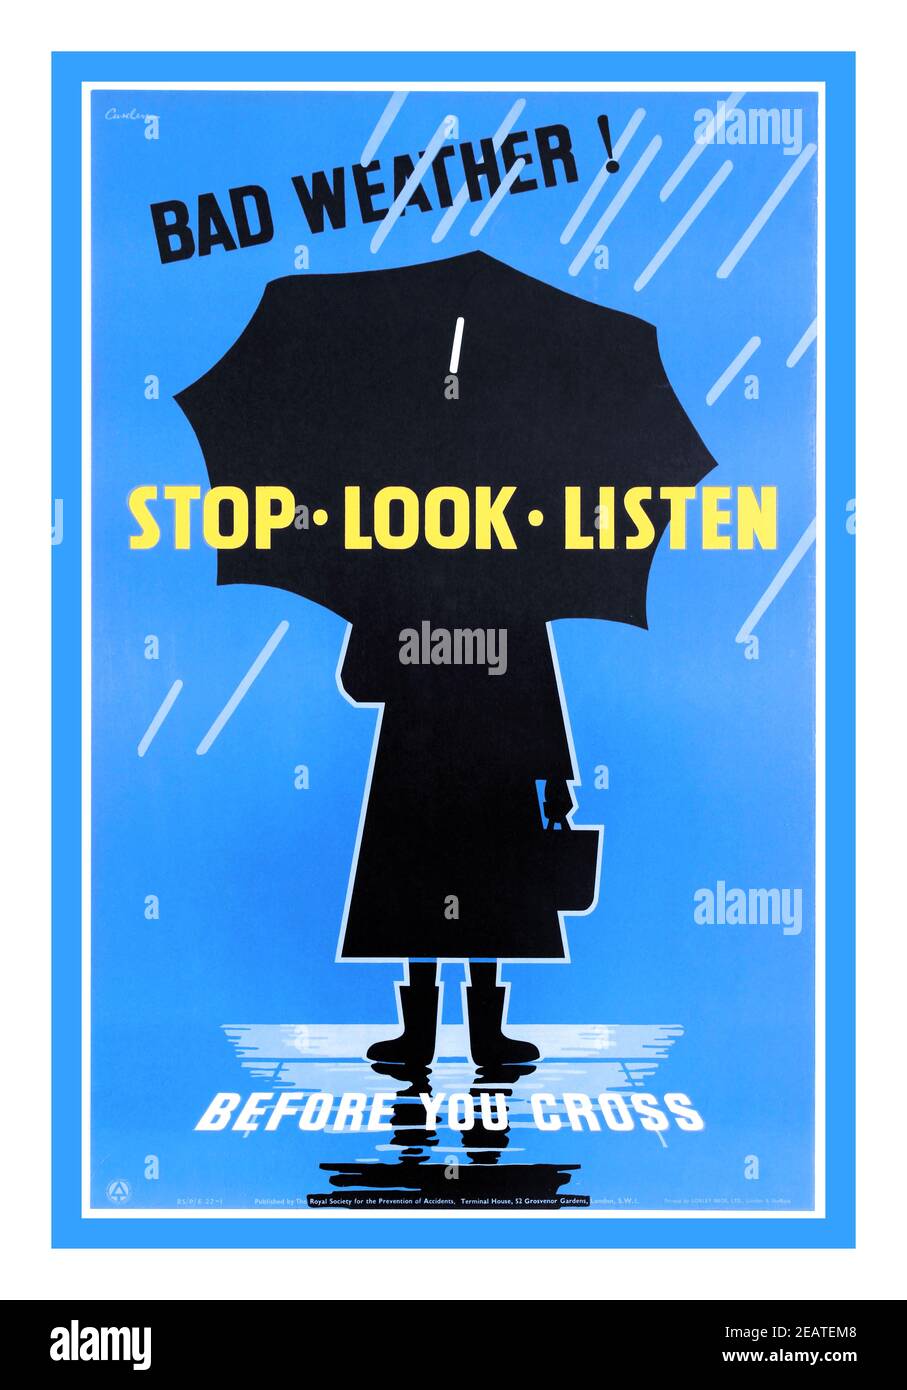 Safety Propaganda 1950's Safety information UK vintage poster 'Bad Weather Stop-Look-Listen Before You Cross'. The Royal Society for the Prevention of Accidents (RoSPA) is a British charity that aims to save lives and prevent life-changing injuries which occur as a result of accidents. Leonard Cusden widely respected British poster artist of the 1940s and ‘50s. icon of industrial poster design. Published by the Royal Society for the Prevention of Accidents - Country: UK. Year: 1950s. Artist Cusden. Stock Photo